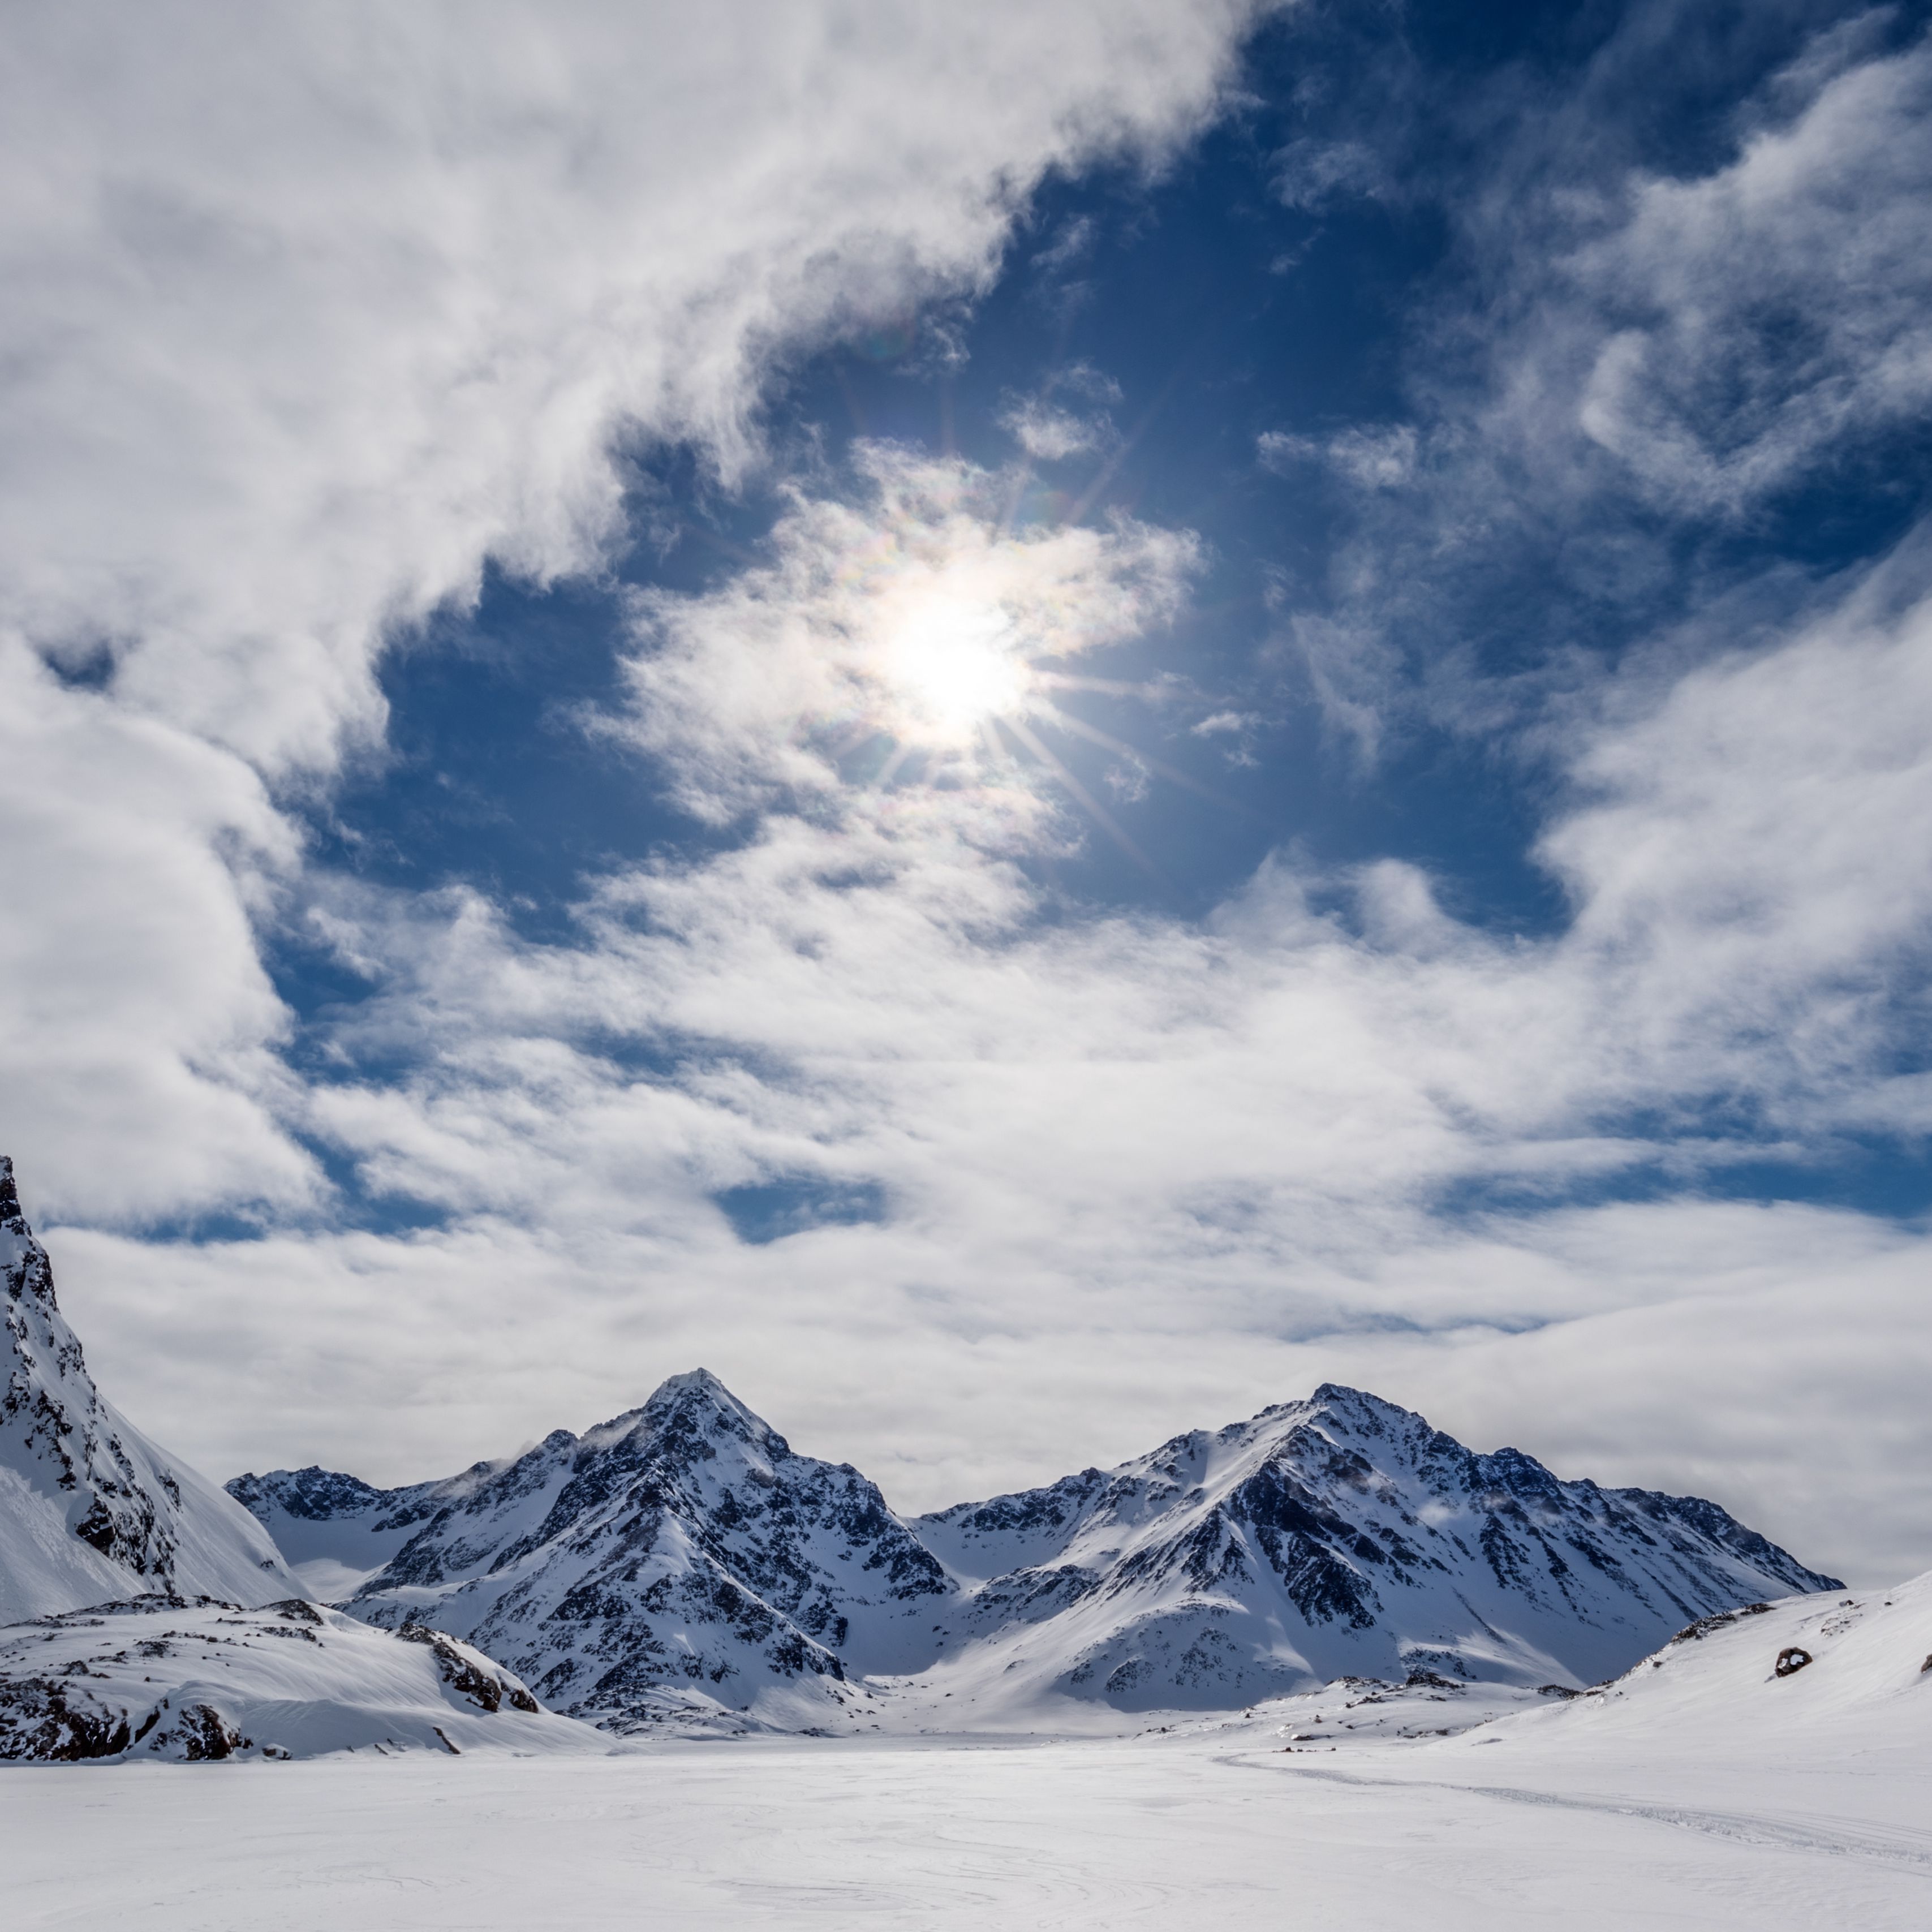 Download wallpapers 3415x3415 mountains, snow, winter, clouds, sky, rays, sun ipad pro 12.9 retina for parallax hd backgrounds